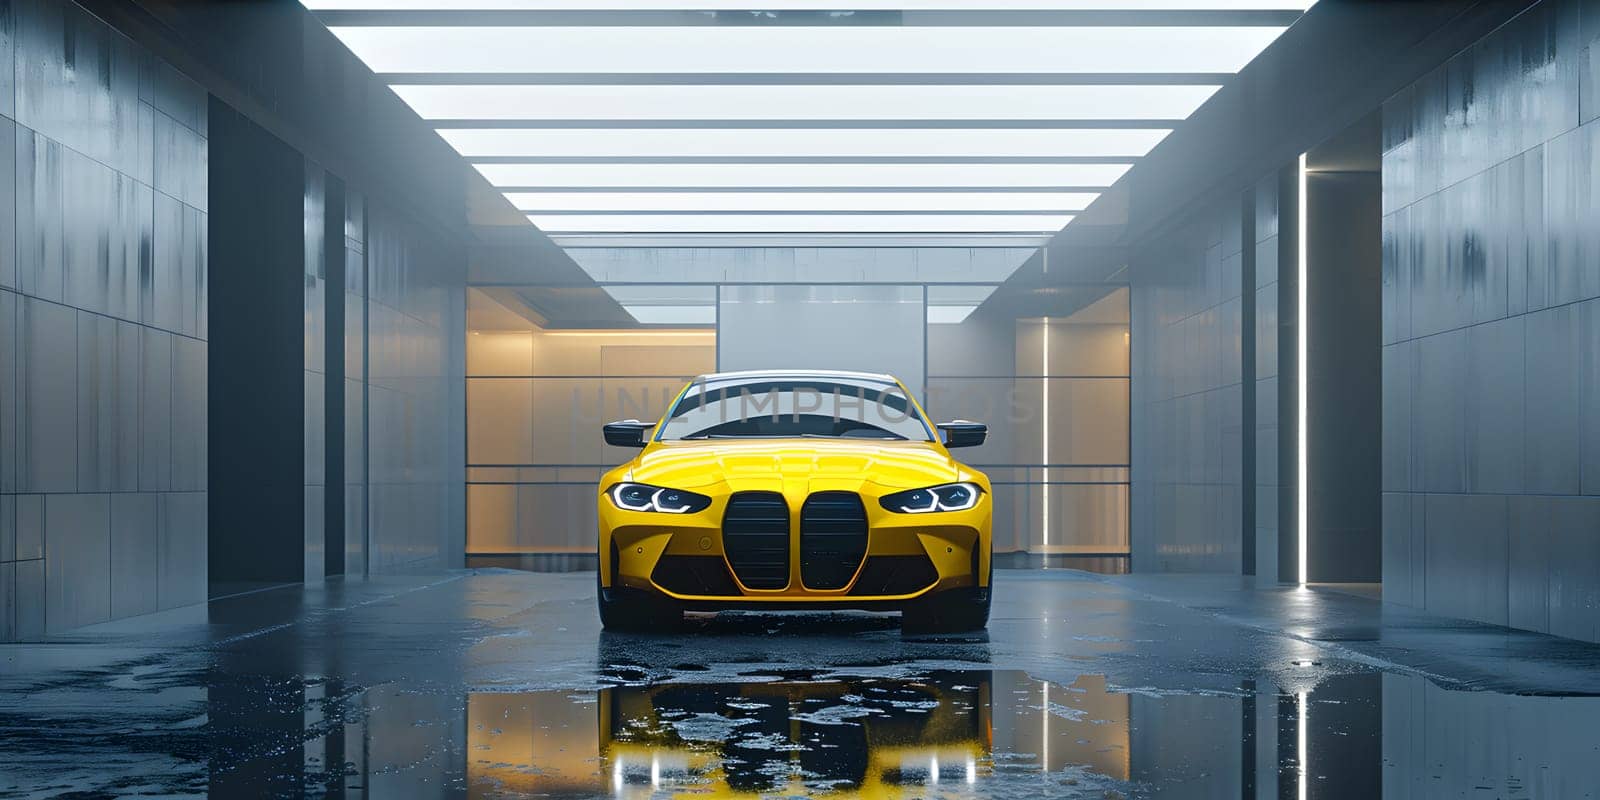 A yellow vehicle sits in the garage with bright automotive lighting by Nadtochiy